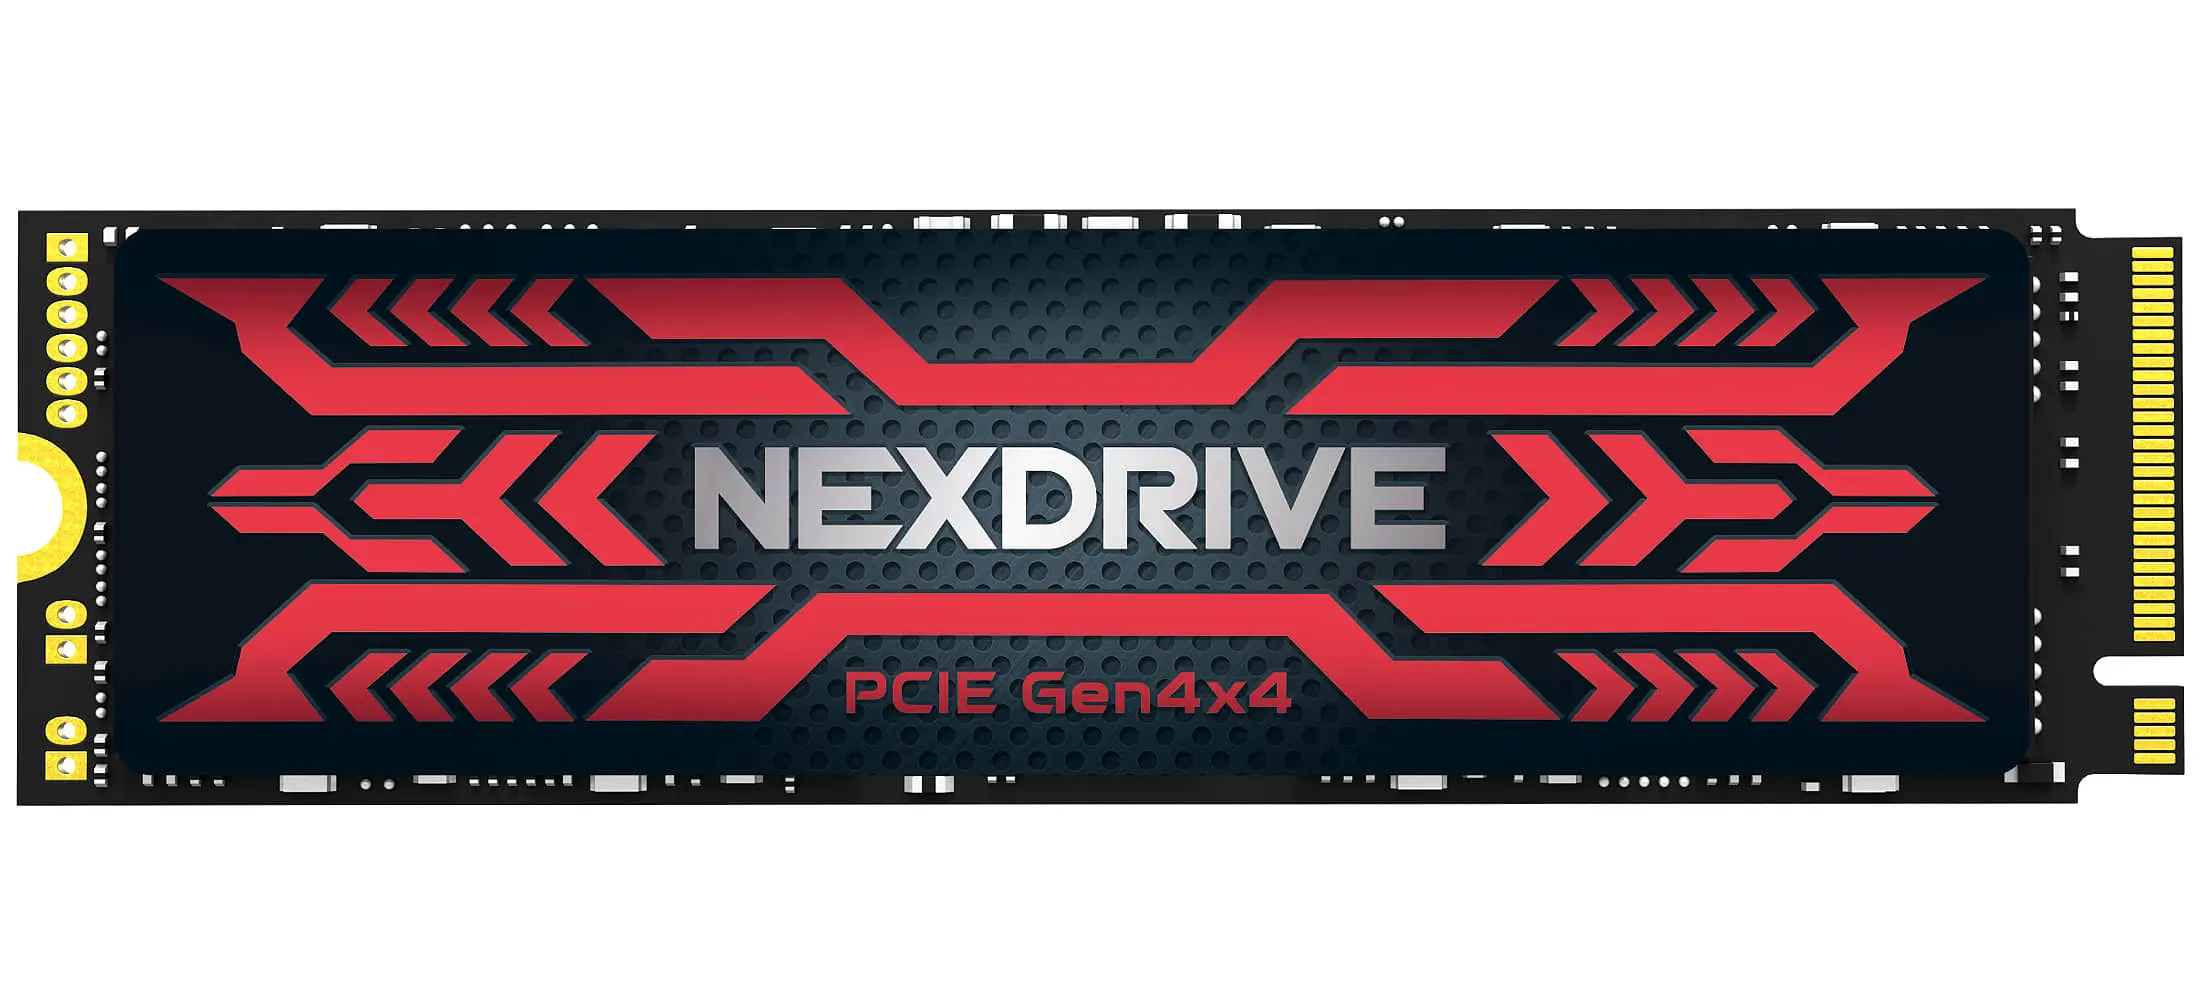 NEXDRIVE Gen4 *4 PCIe SSD 1TB TO 2TB Read Speed 7000mb/s Write Speed 6800mb/s Use For Laptop and Gamer PC